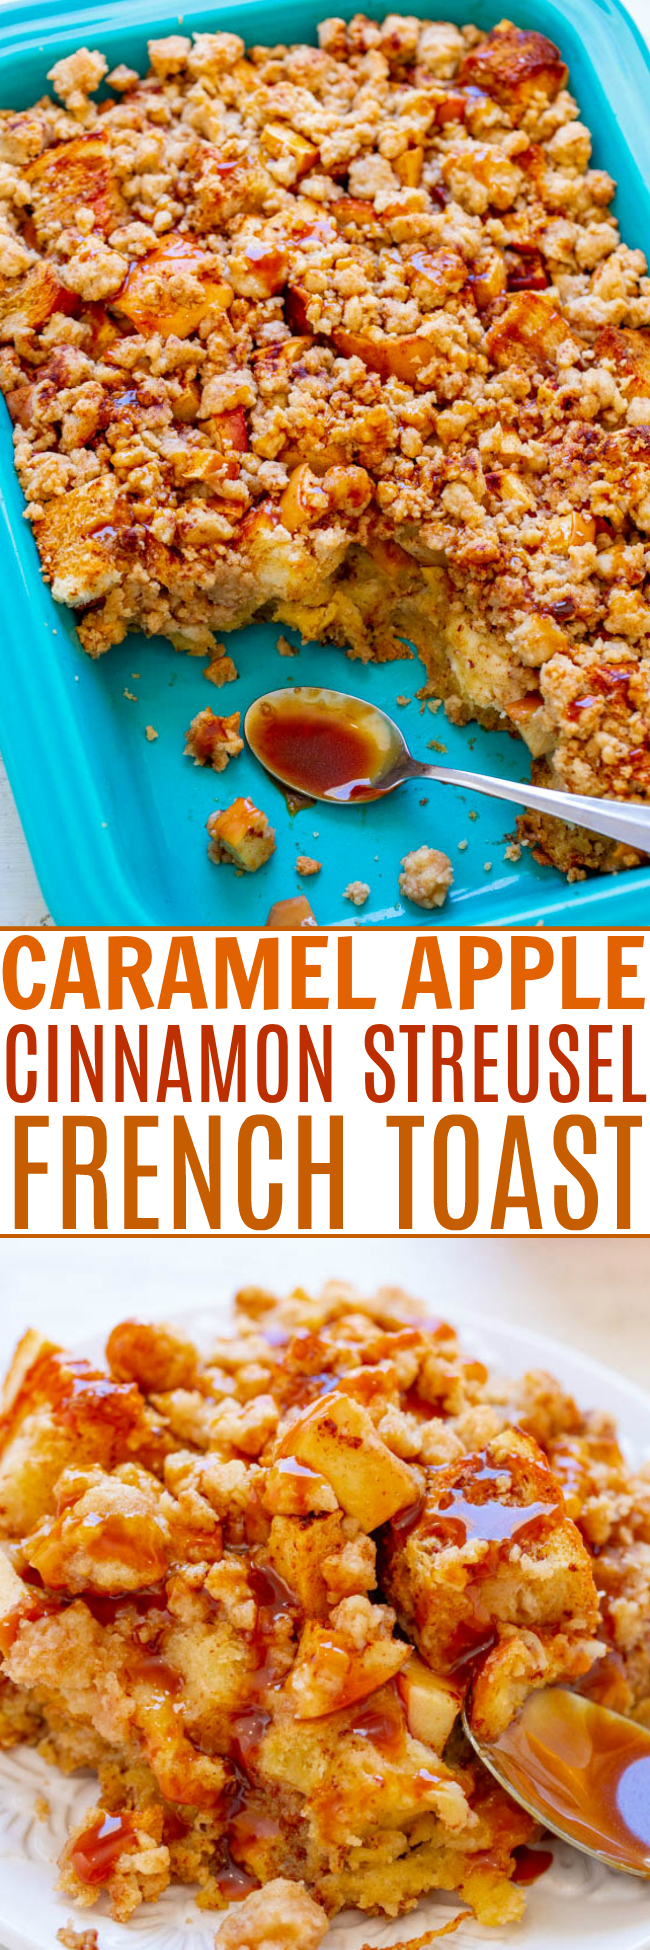 Caramel Apple French Toast Casserole — An EASY recipe with a make-ahead overnight option so it's perfect for weekend or holiday brunches!! Soft bread, juicy apples, and buttery streusel topping is pure DECADENT comfort food!!